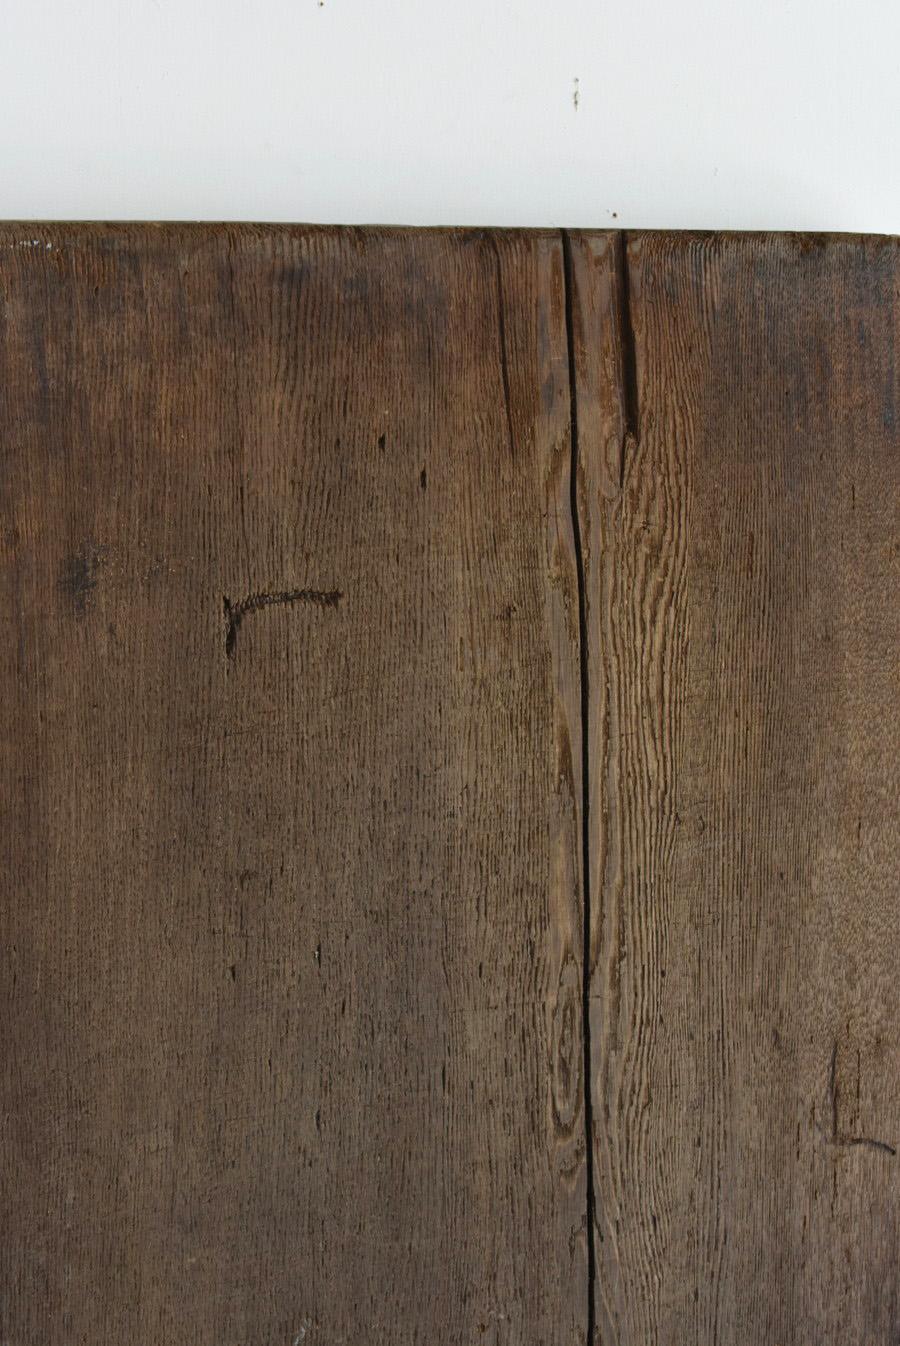 19th Century Japanese Antique Wooden Wabi-Sabi Board/Wall Hanging Board/Table Top/1868-1912 For Sale